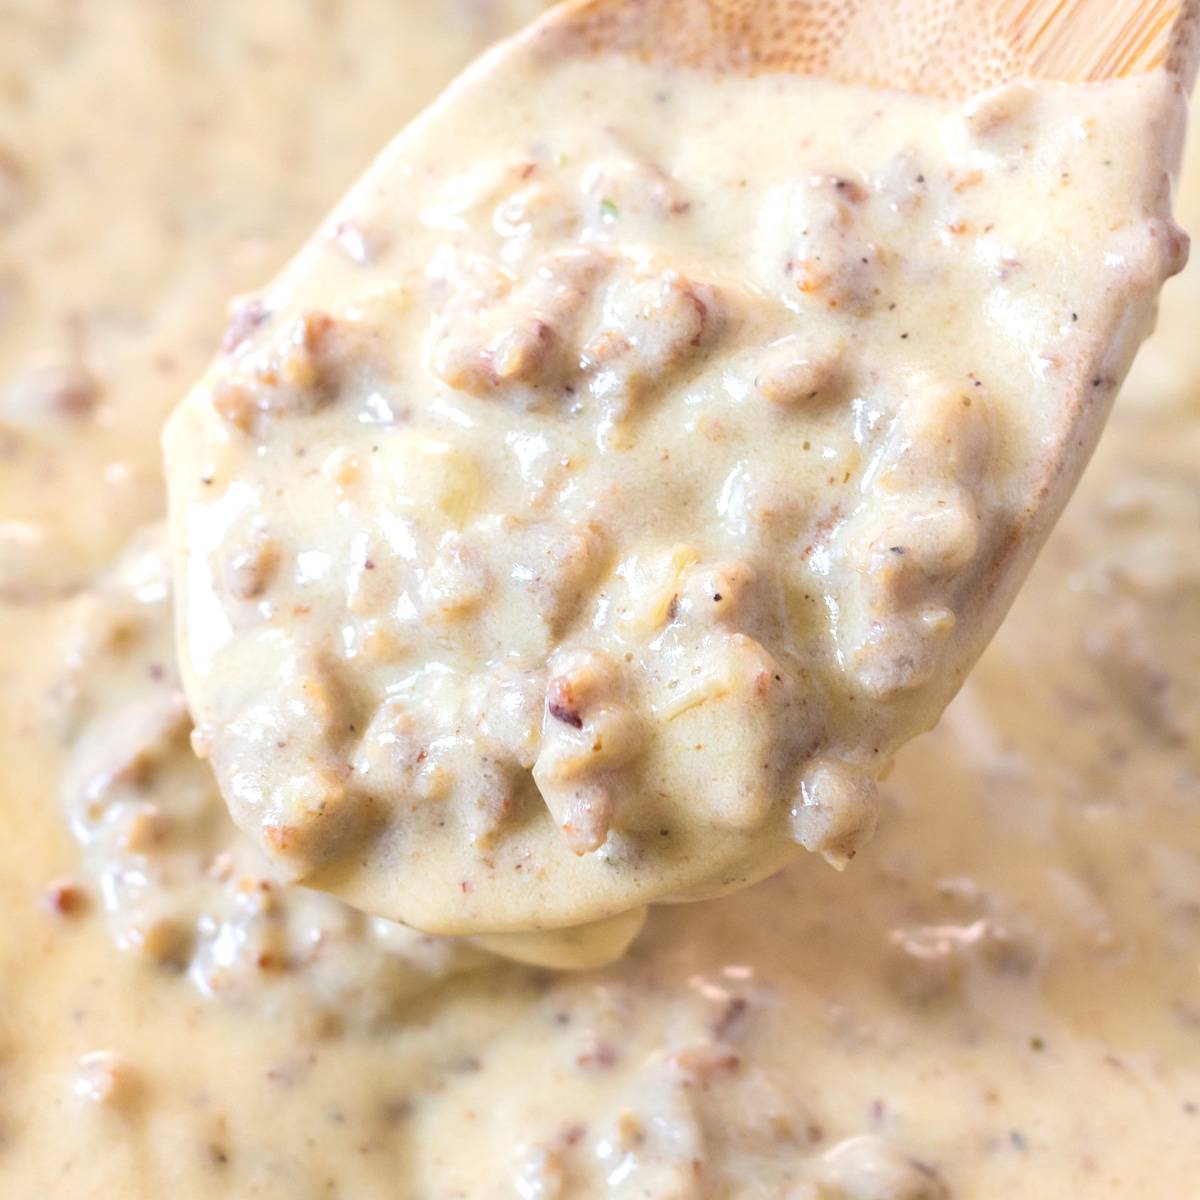 sausage gravy recipe best homemade southern style from scratch buttermilk biscuits